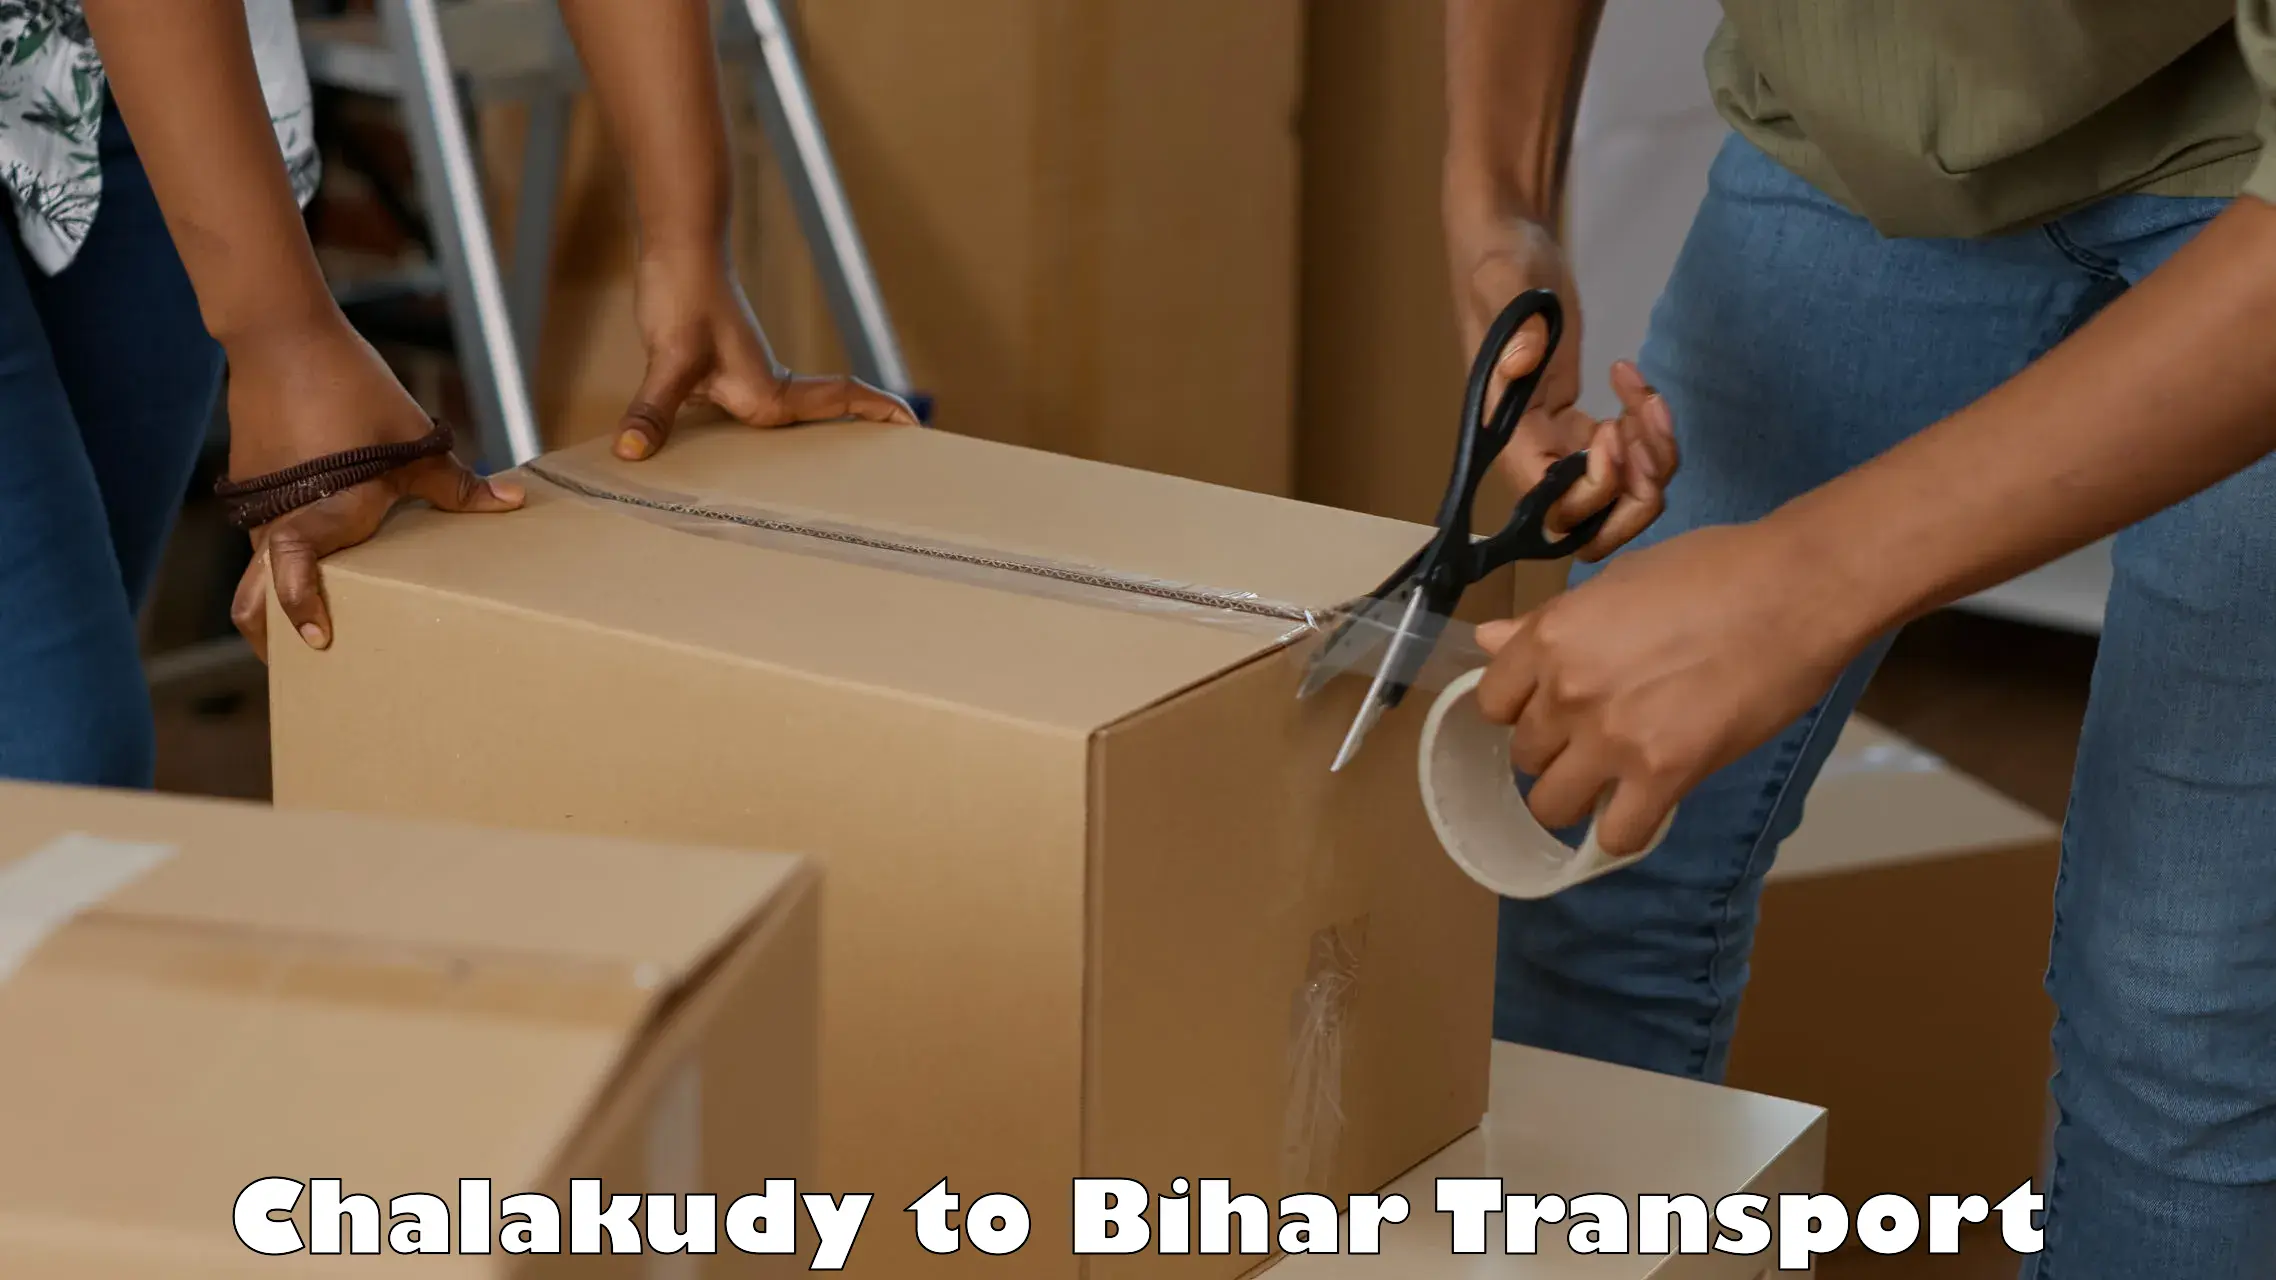 Truck transport companies in India Chalakudy to Vaishali